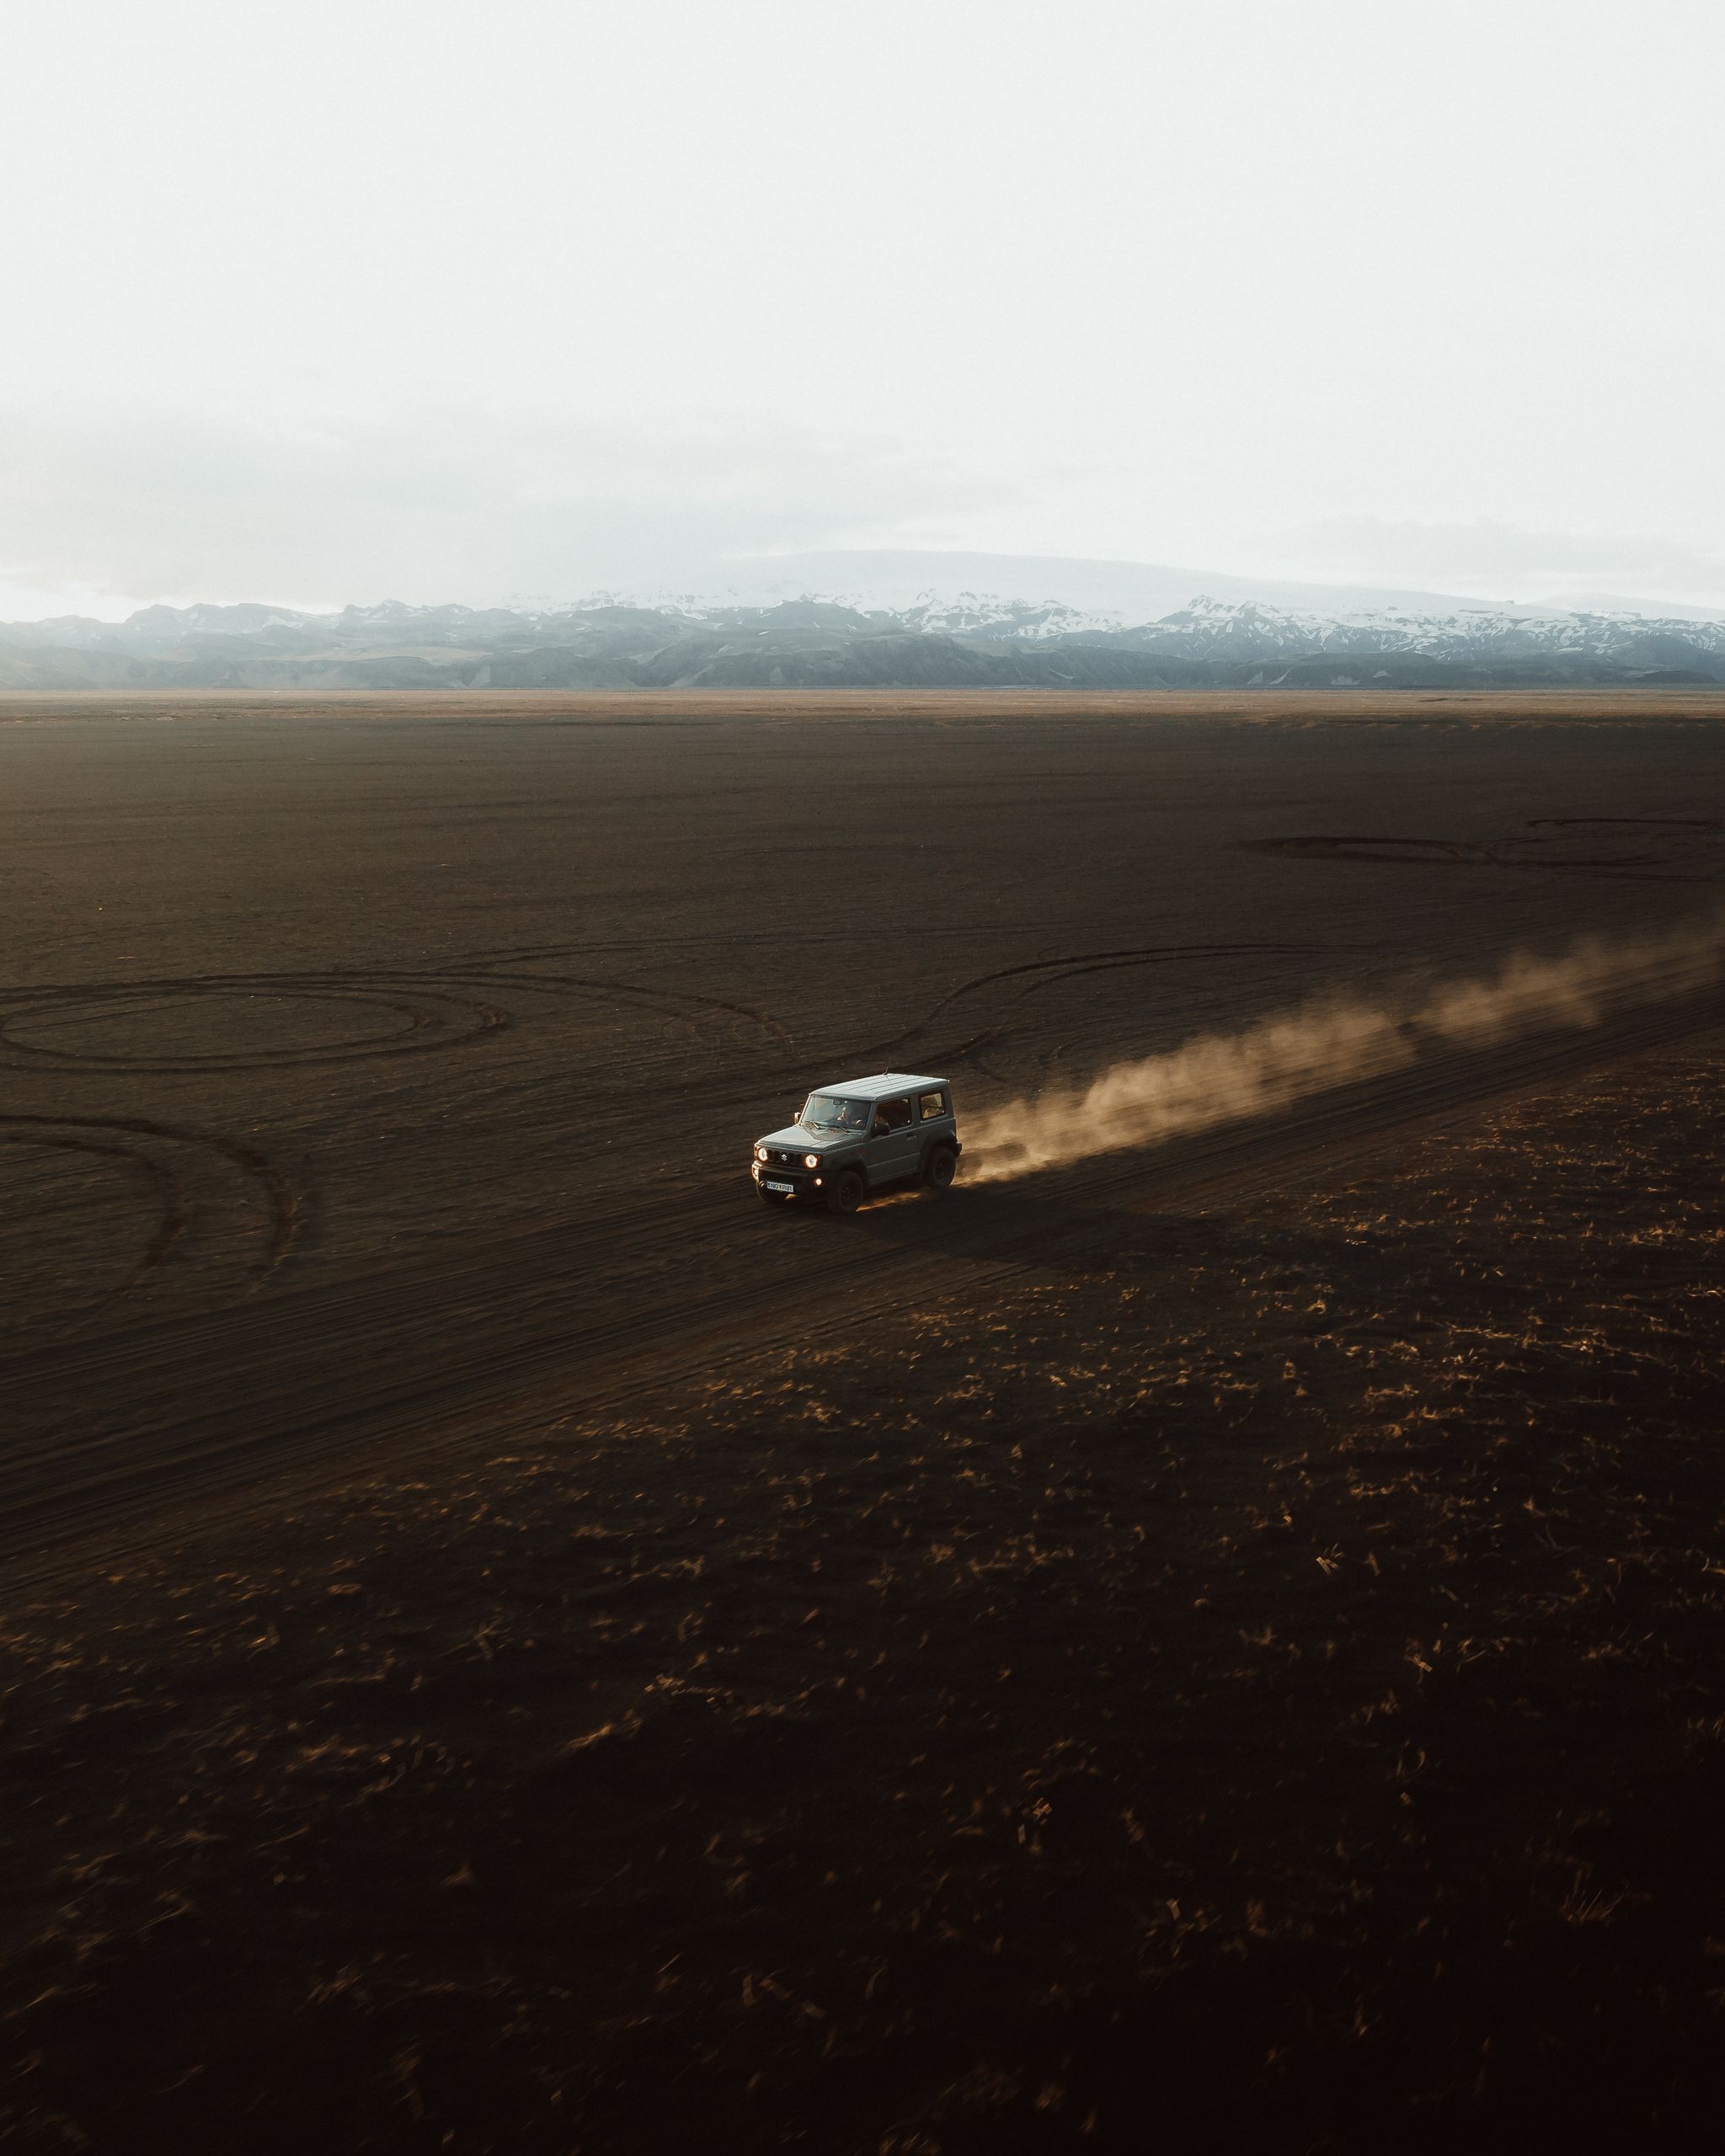 A 4x4 rental car maneuvering along an F-road in the wild landscapes of Iceland